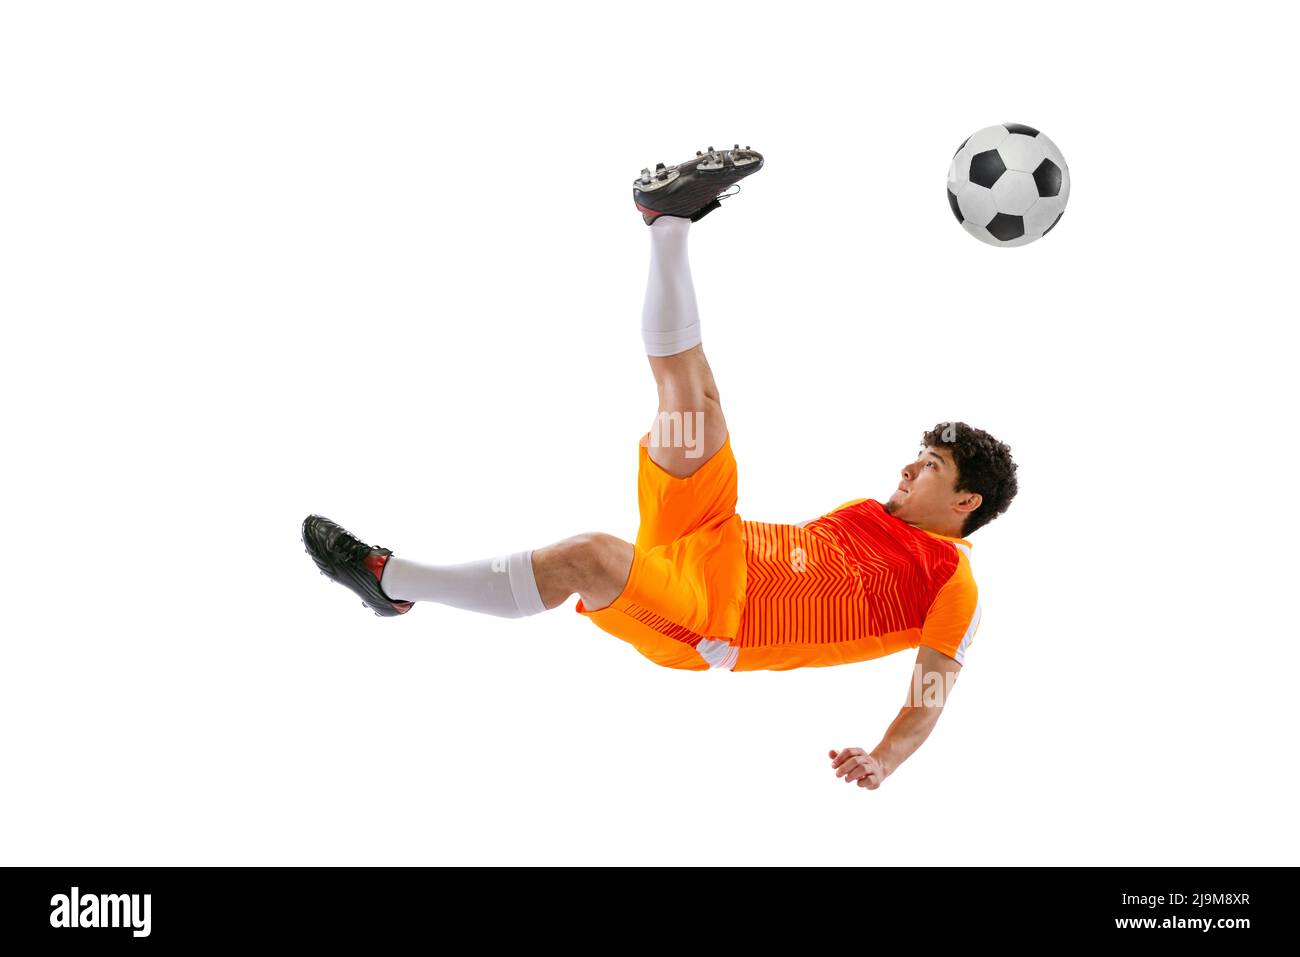 Professional football, soccer player in motion isolated on white studio background. Concept of sport, match, active lifestyle, goal and hobby Stock Photo